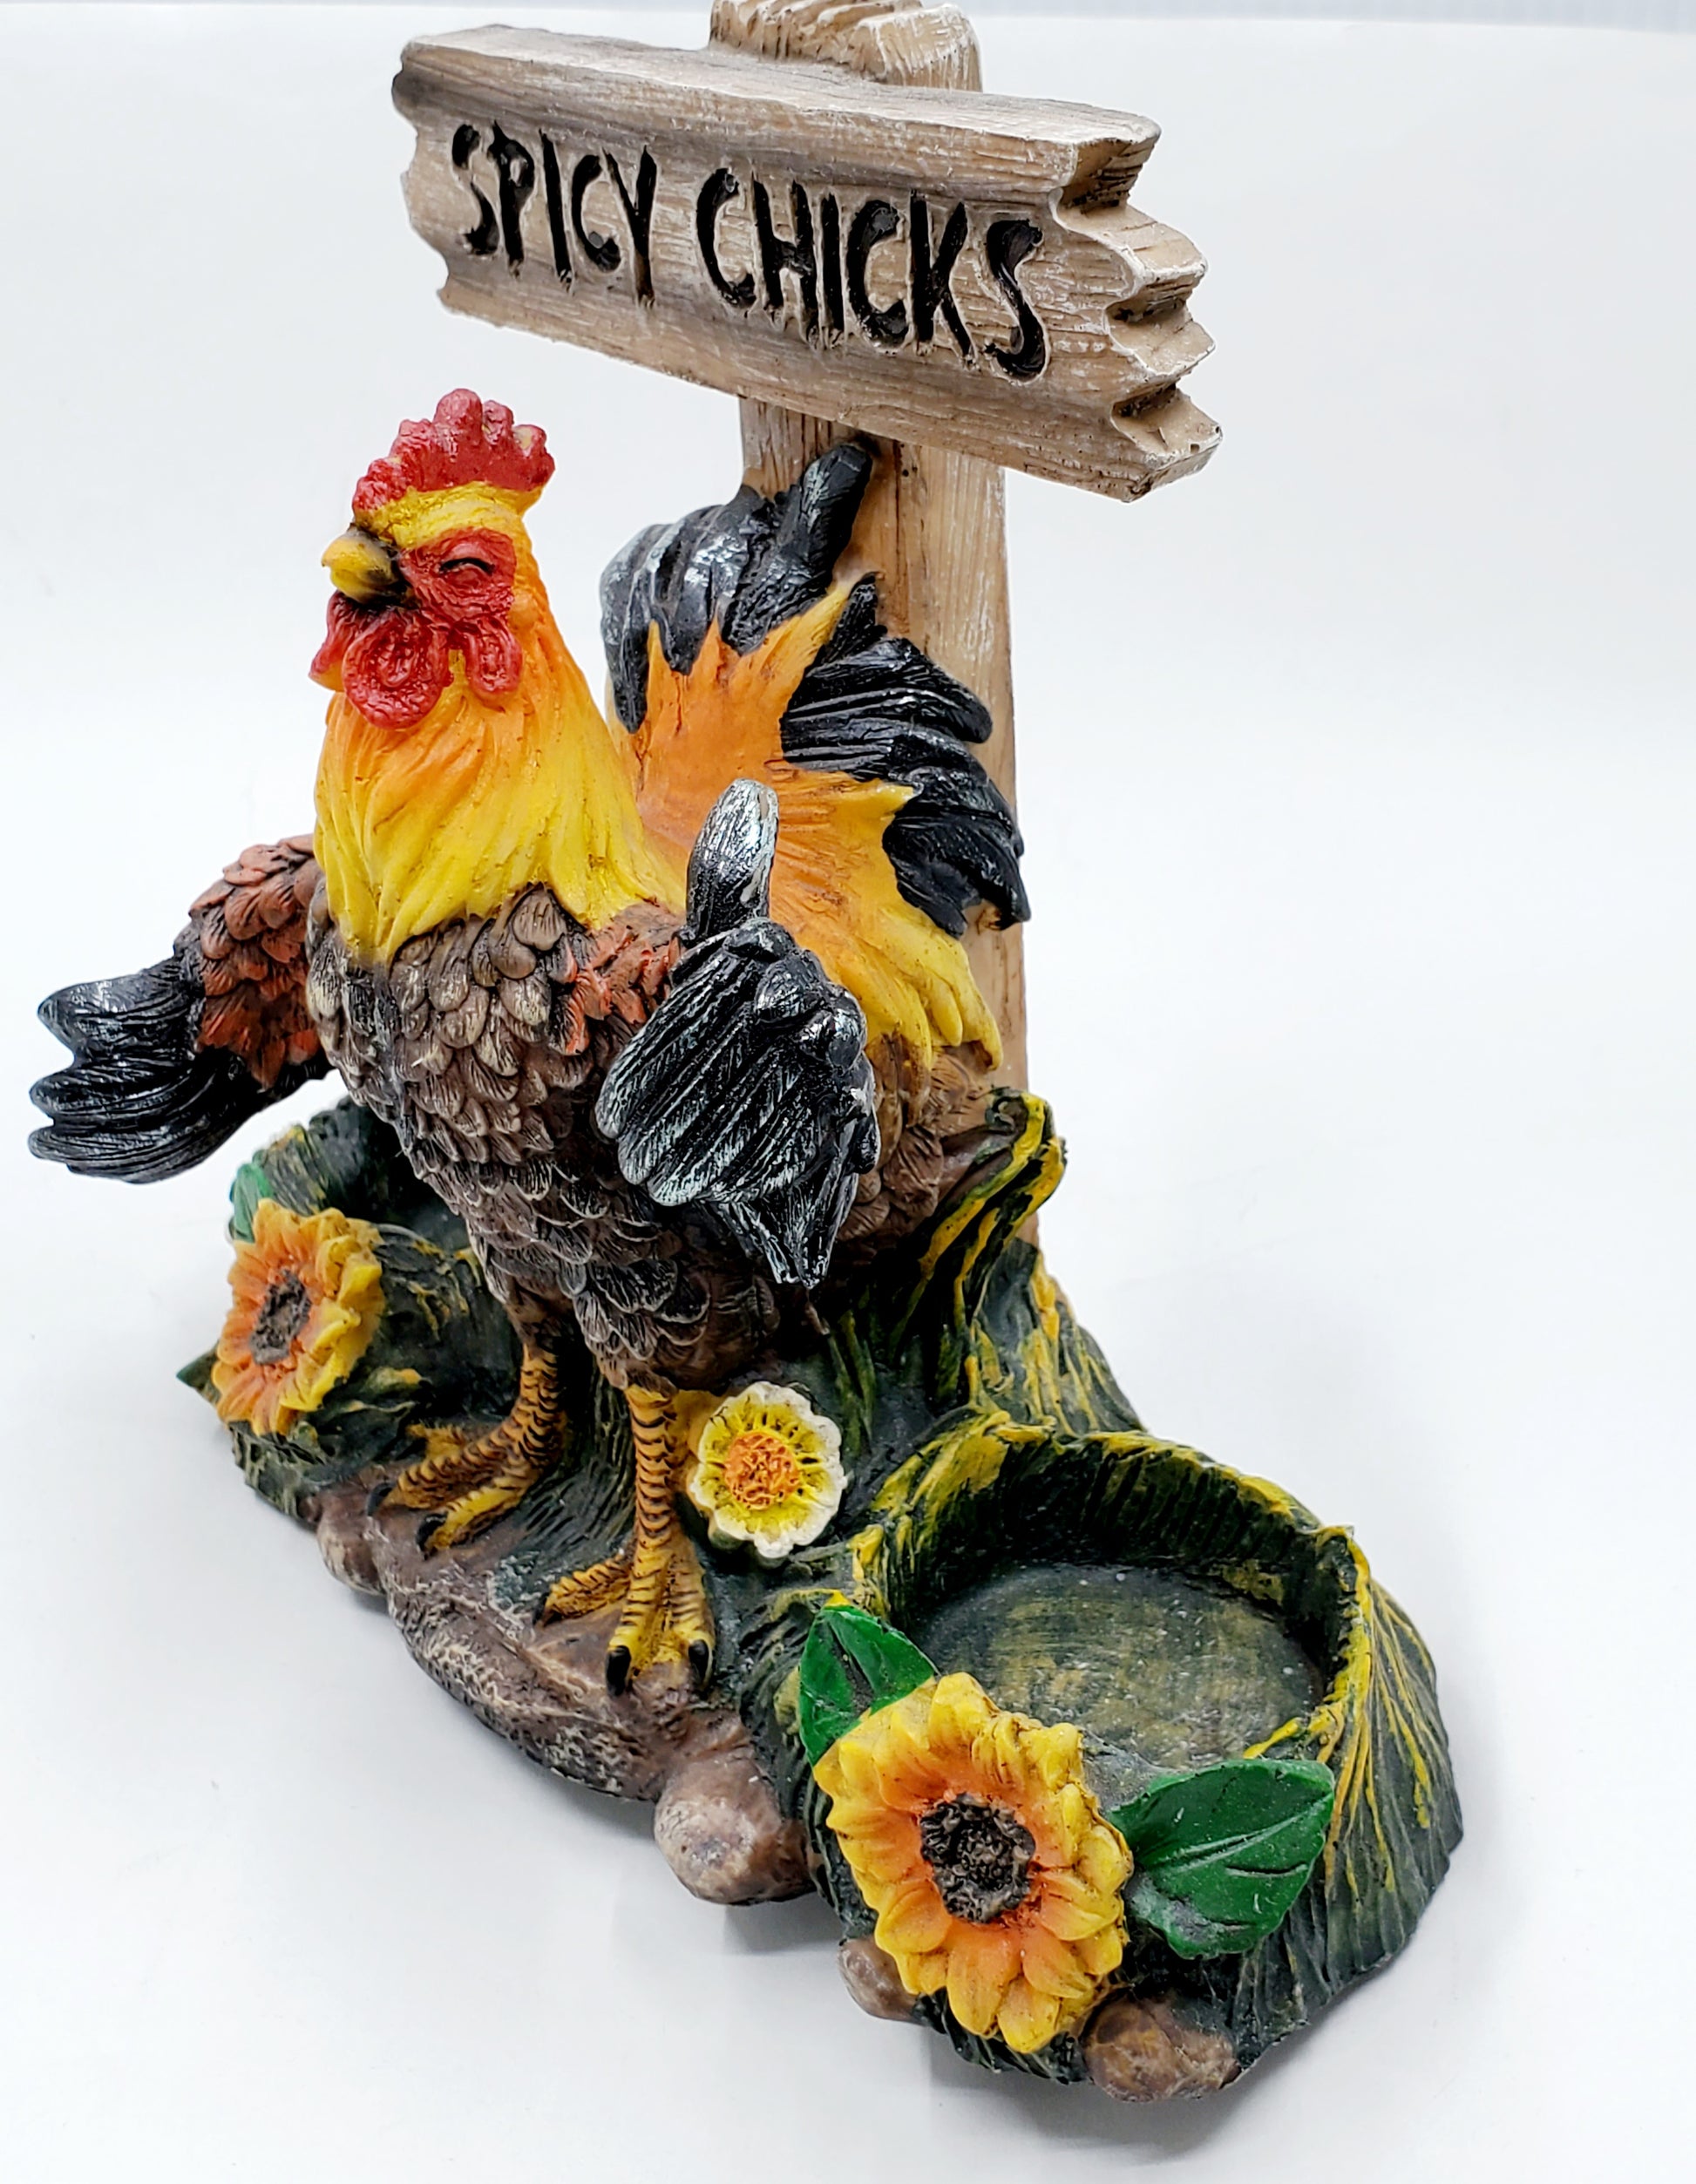 Spicy Chicks Salt & Pepper Shaker - Nile Palace Treasures spicy-chicks-salt-pepper-shaker, 